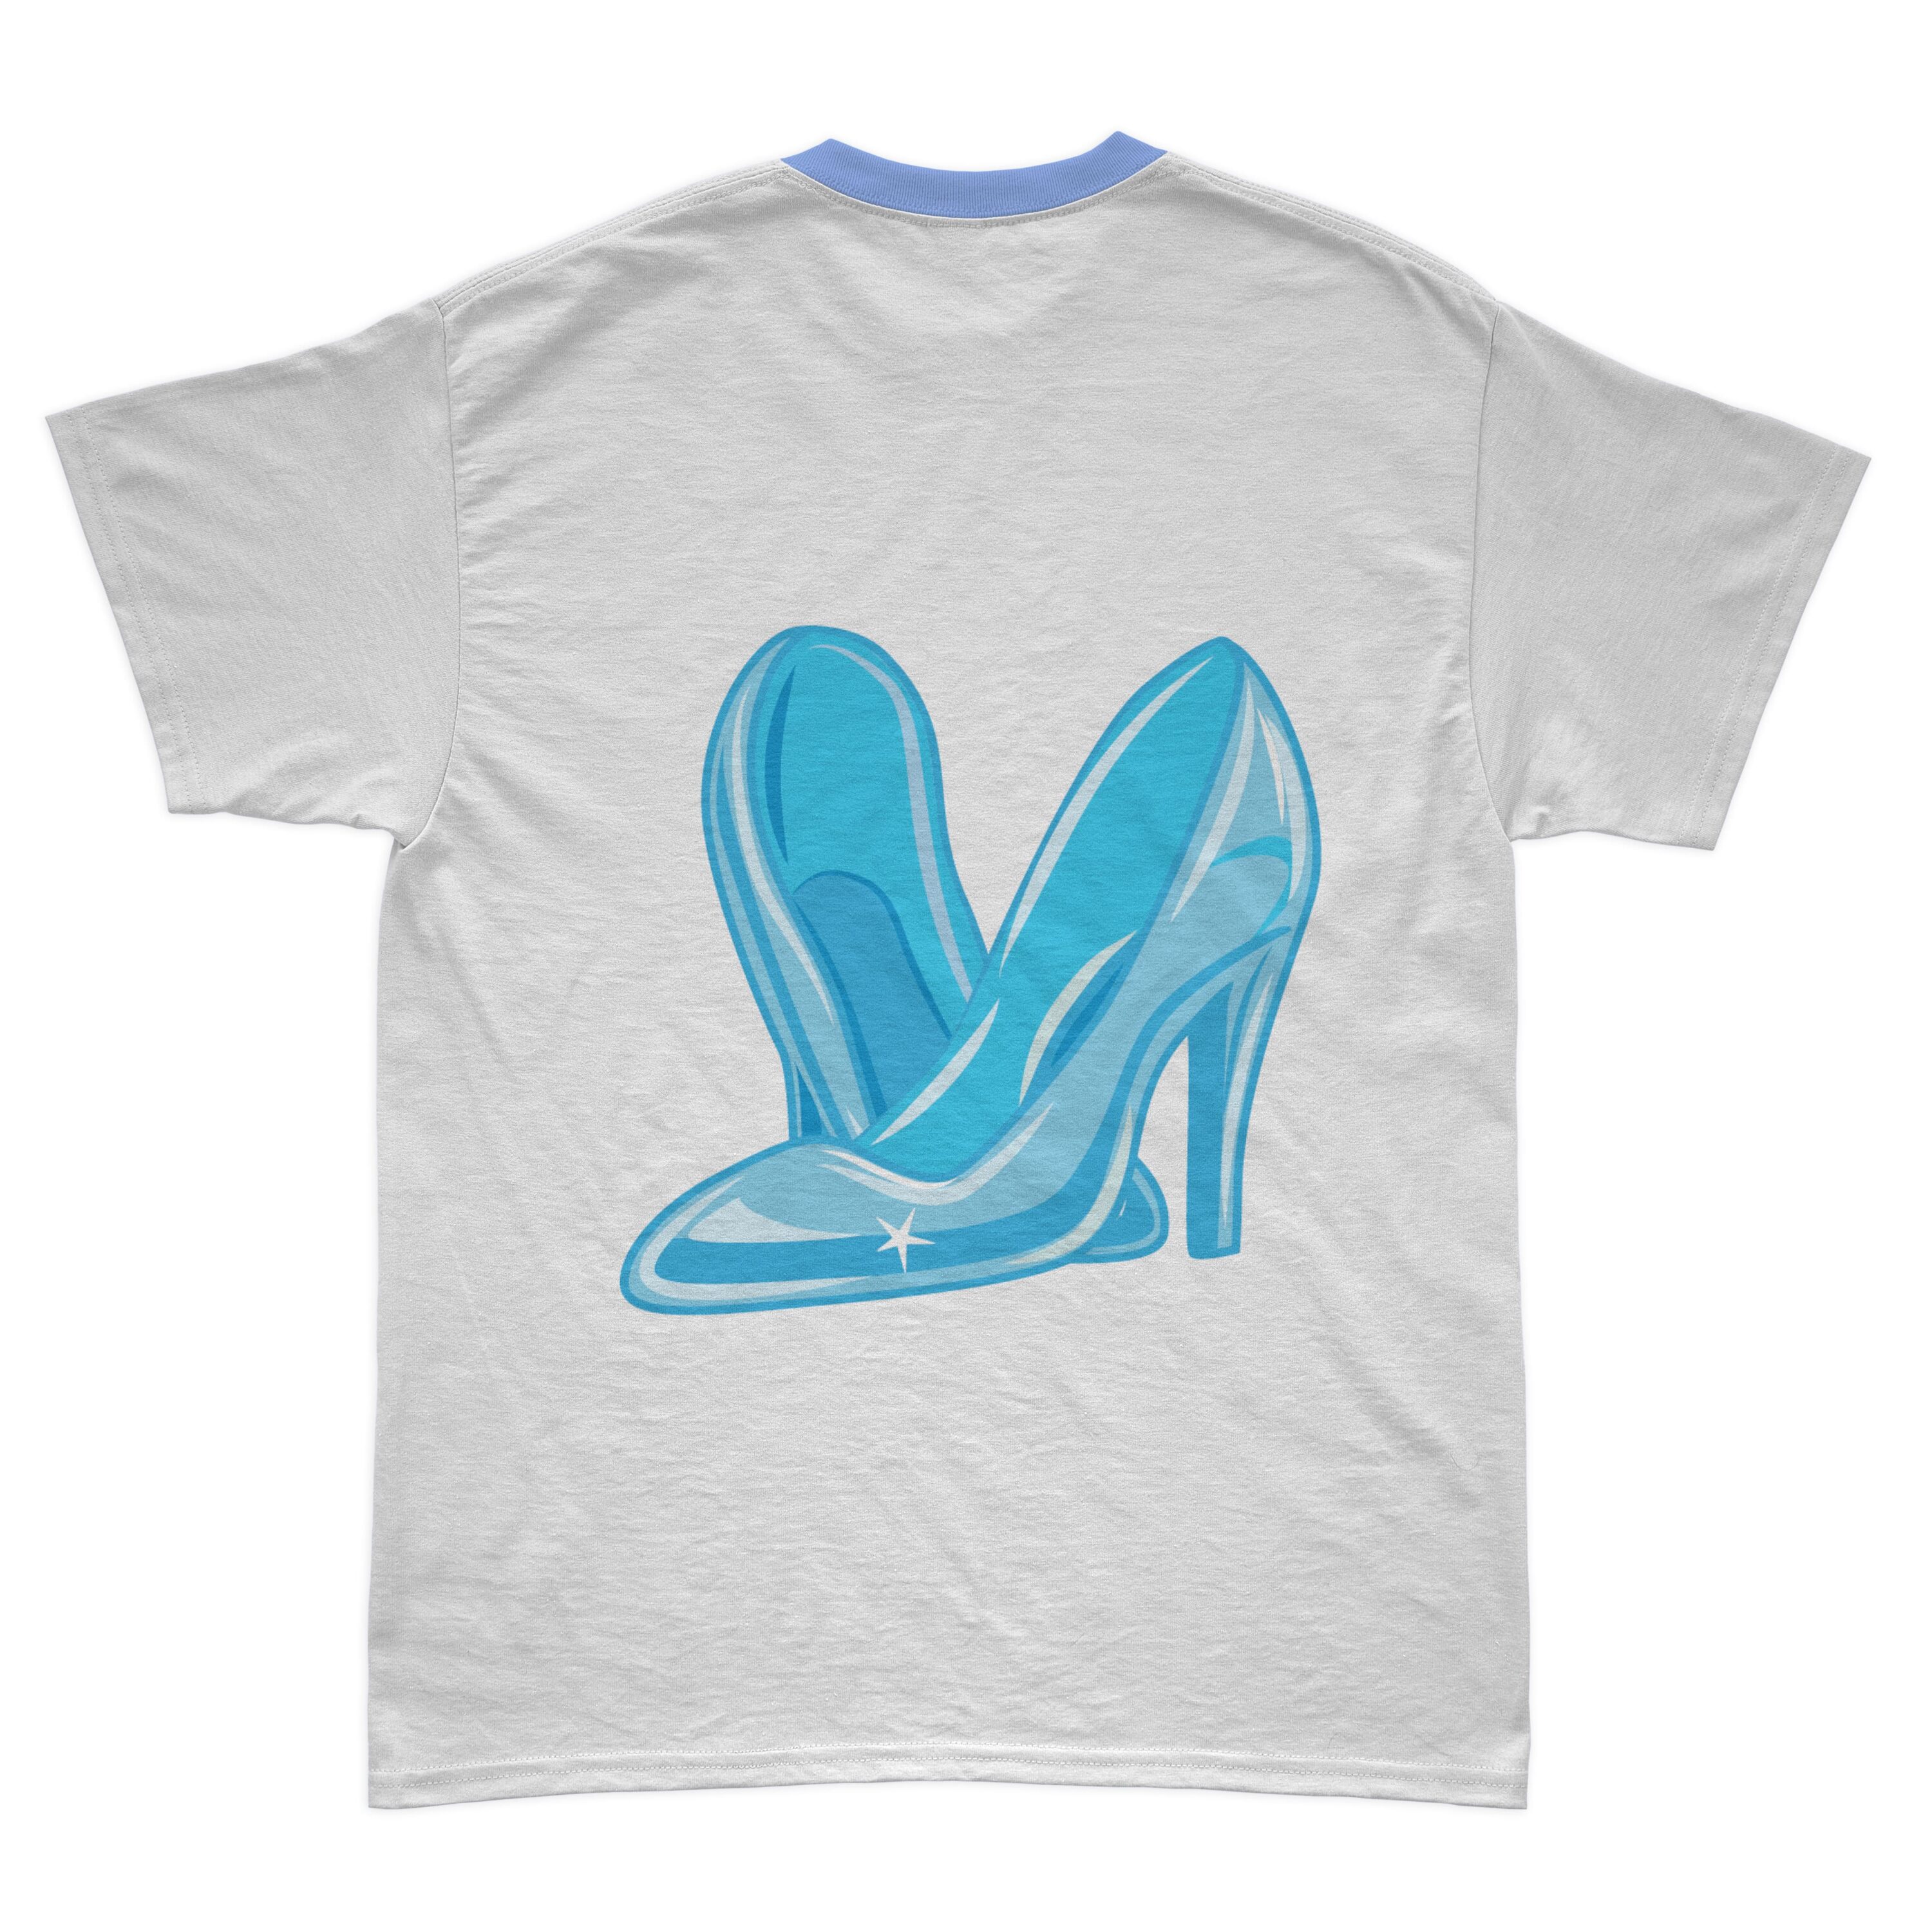 Image of a white t-shirt with an amazing print of Cinderella's blue shoes.